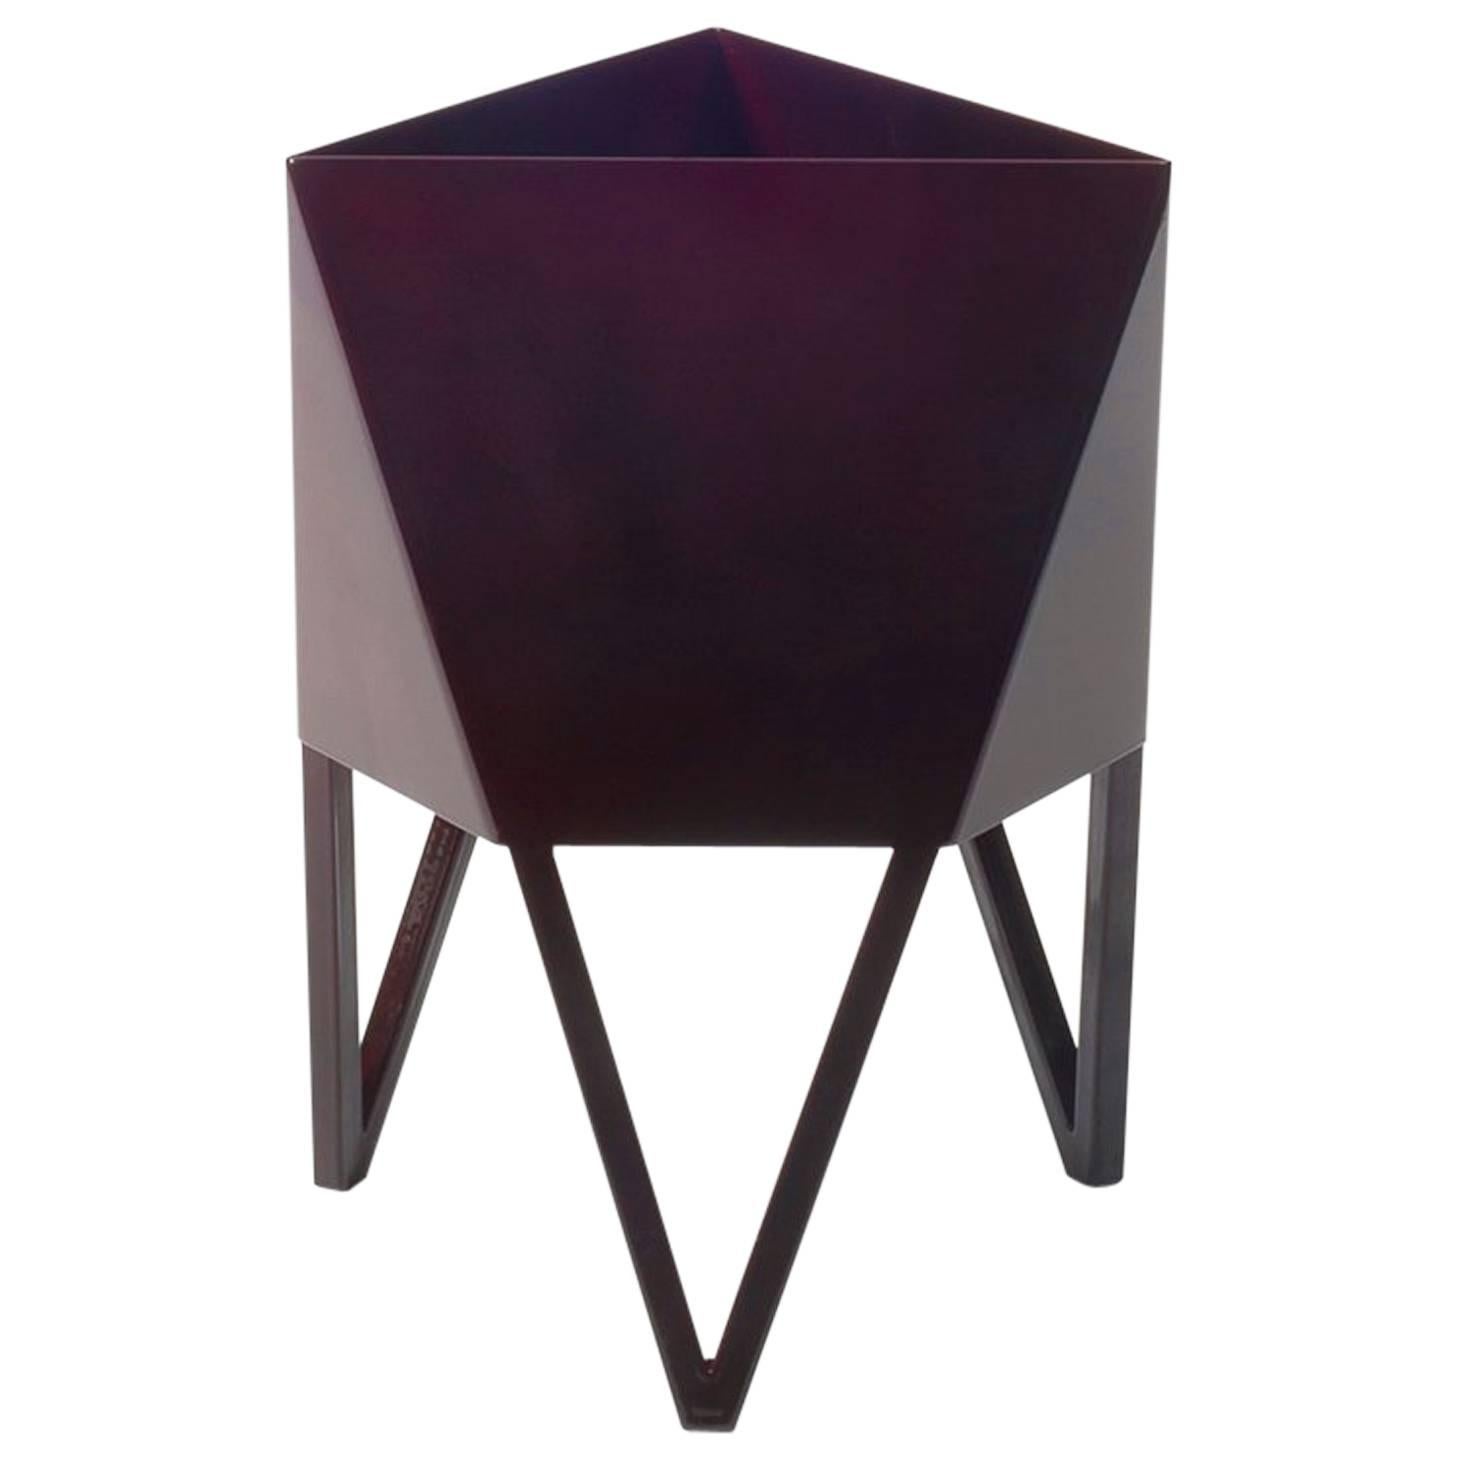 Deca Planter in Glossy Maroon Steel, Small, by Force/Collide